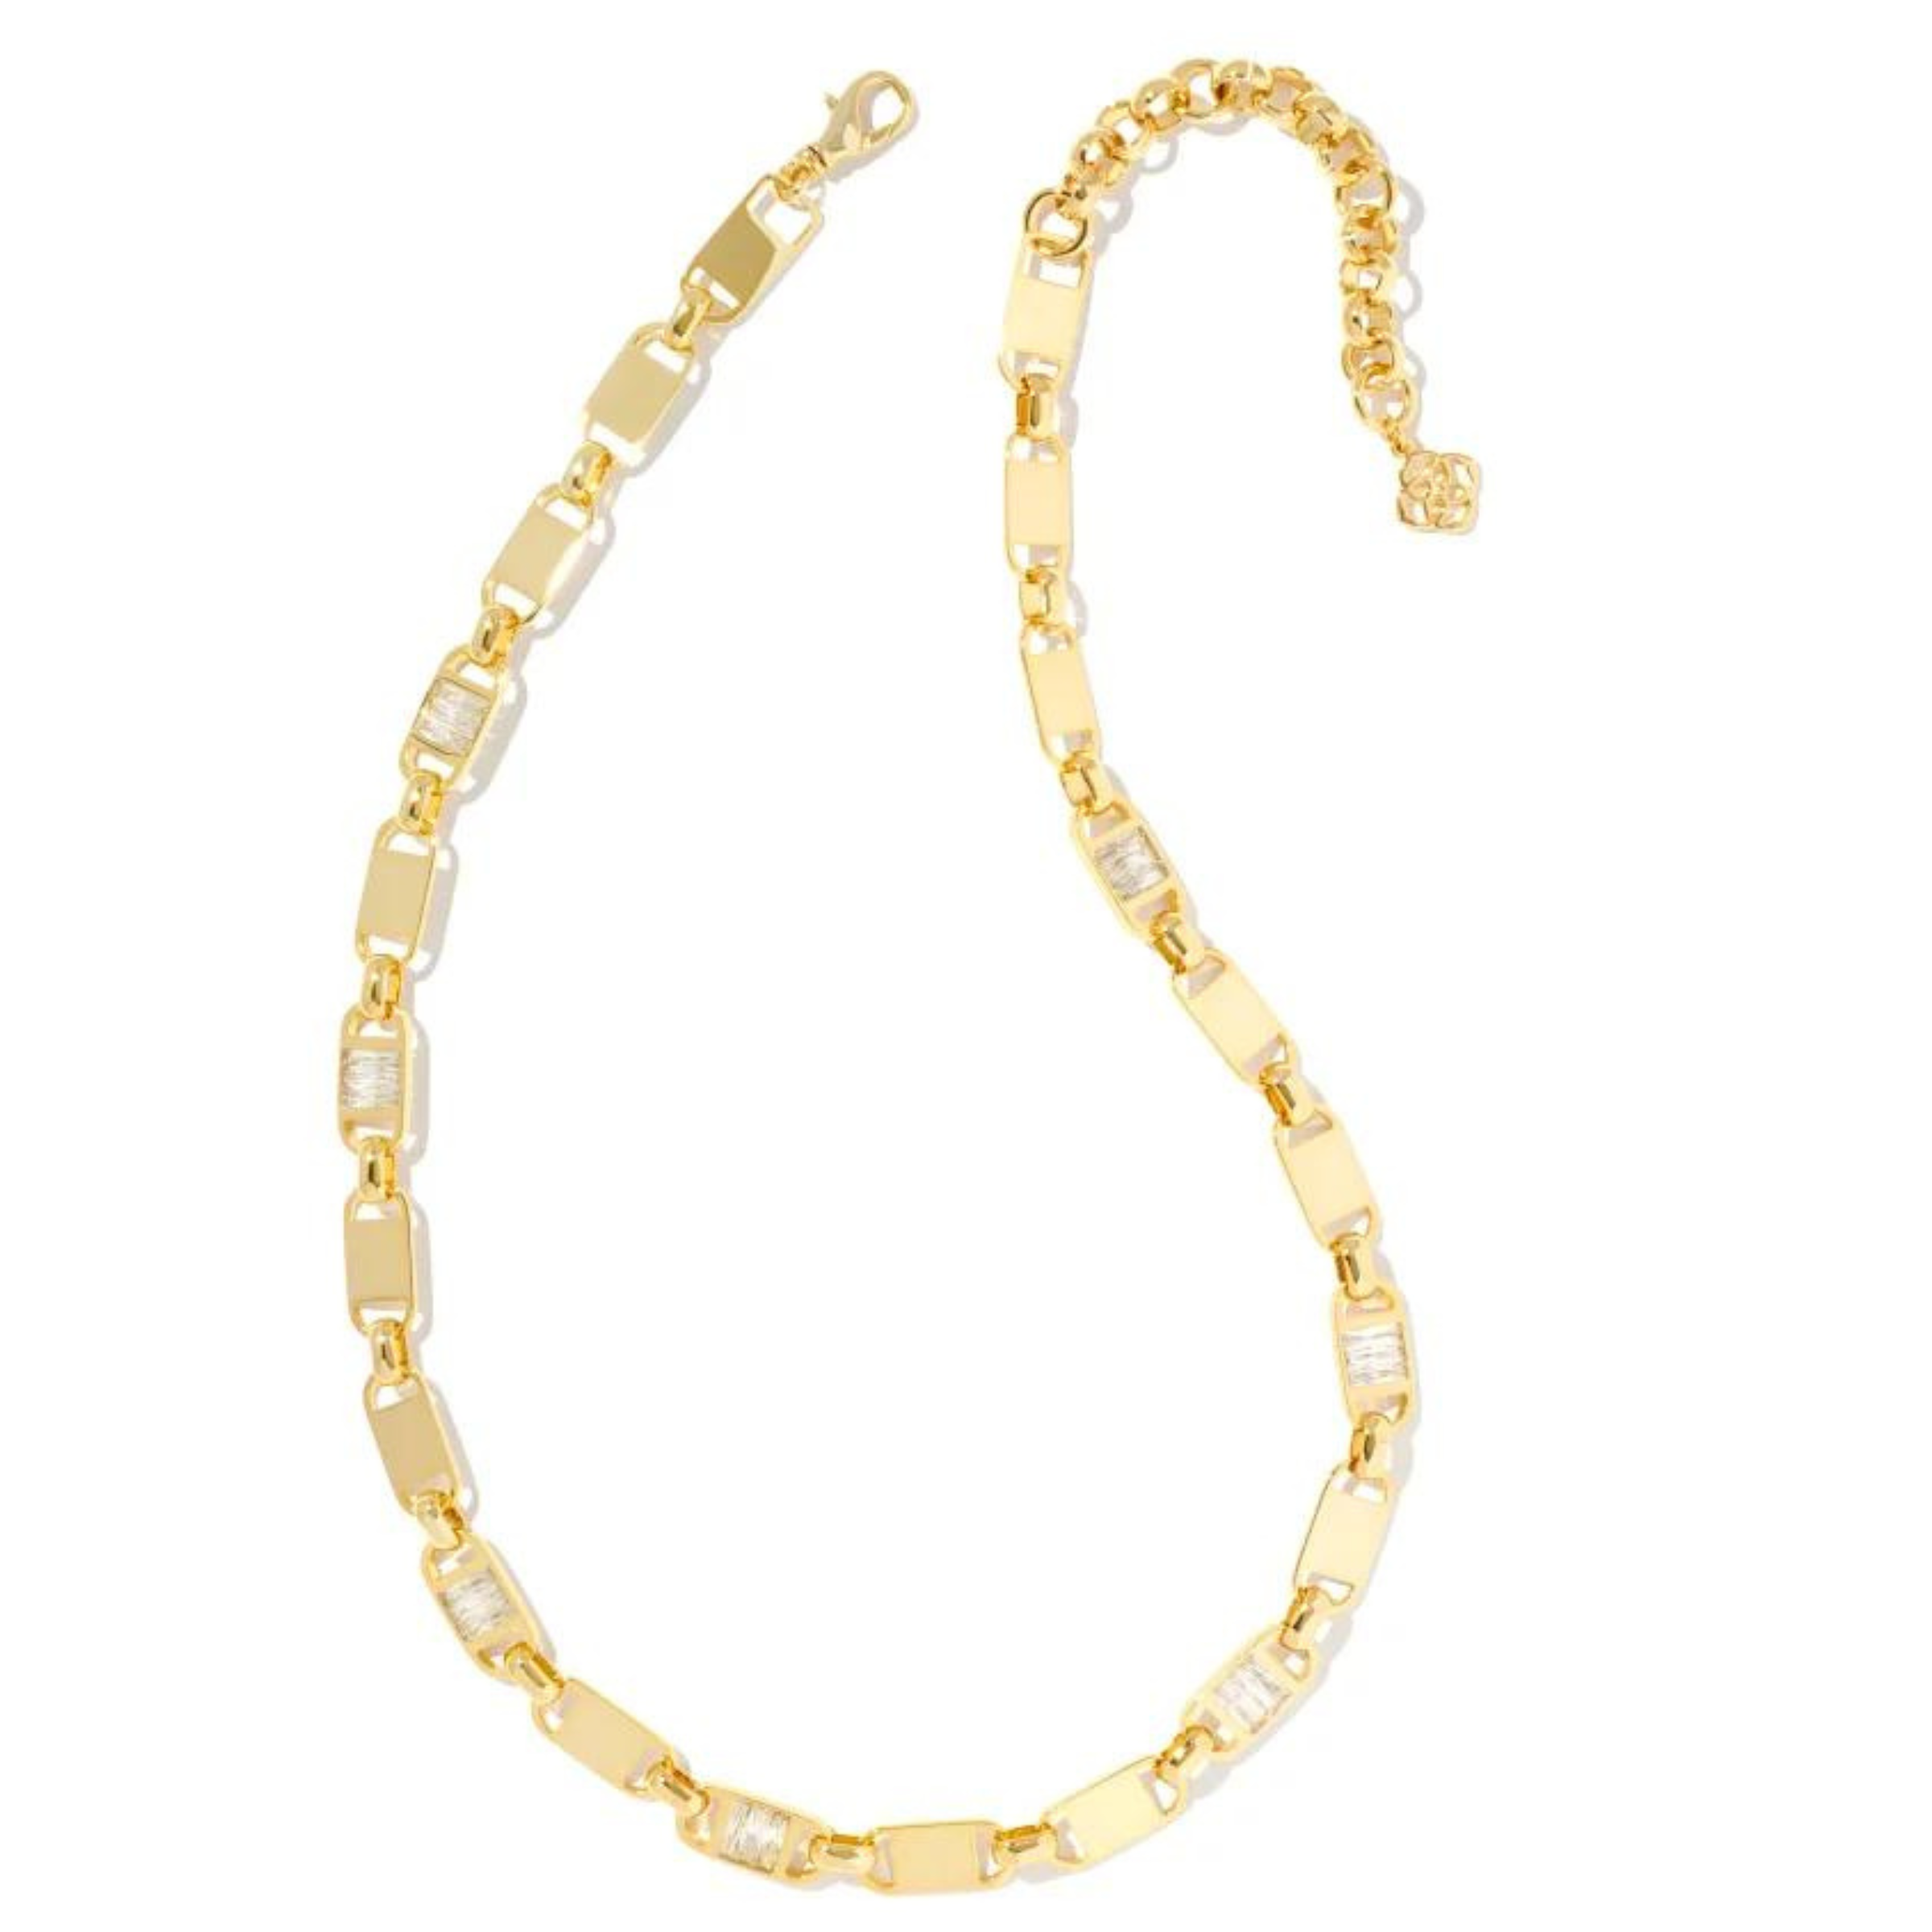 Kendra Scott | Jessie Gold Chain Necklace in White Crystal - Giddy Up Glamour Boutique